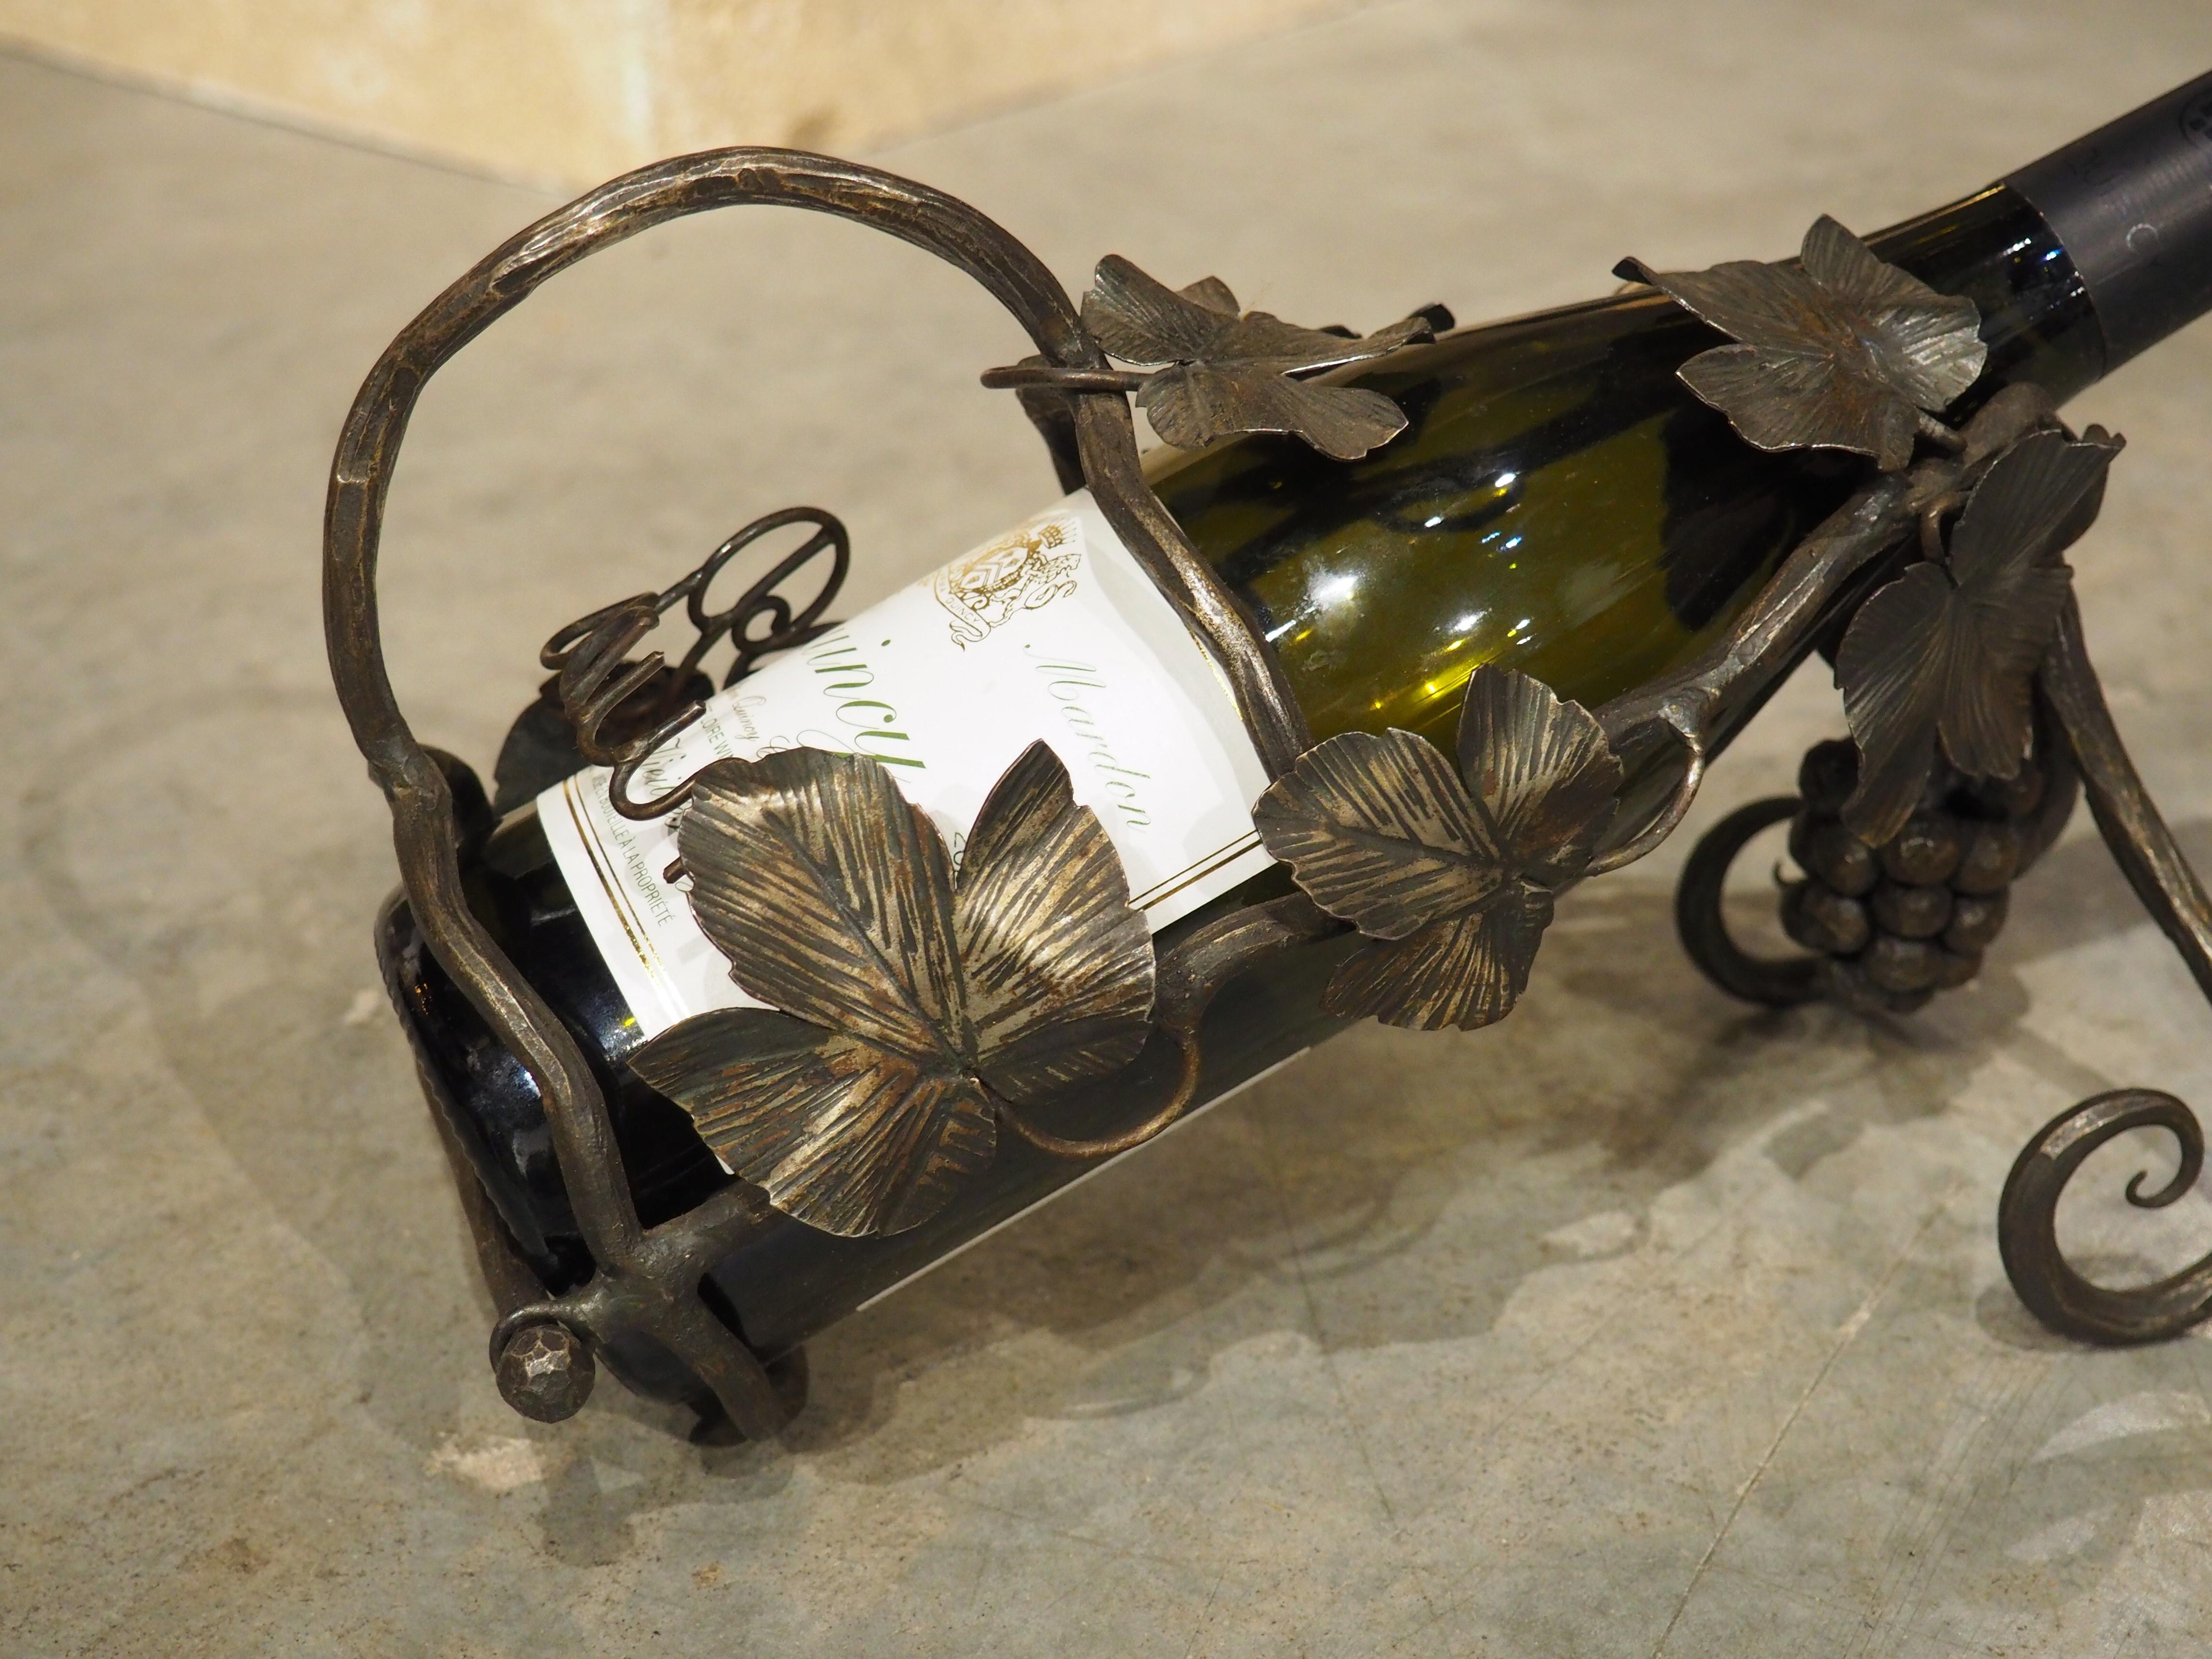 20th Century Antique French Wrought Iron Wine Bottle Holder from Beaune, C. 1900 For Sale